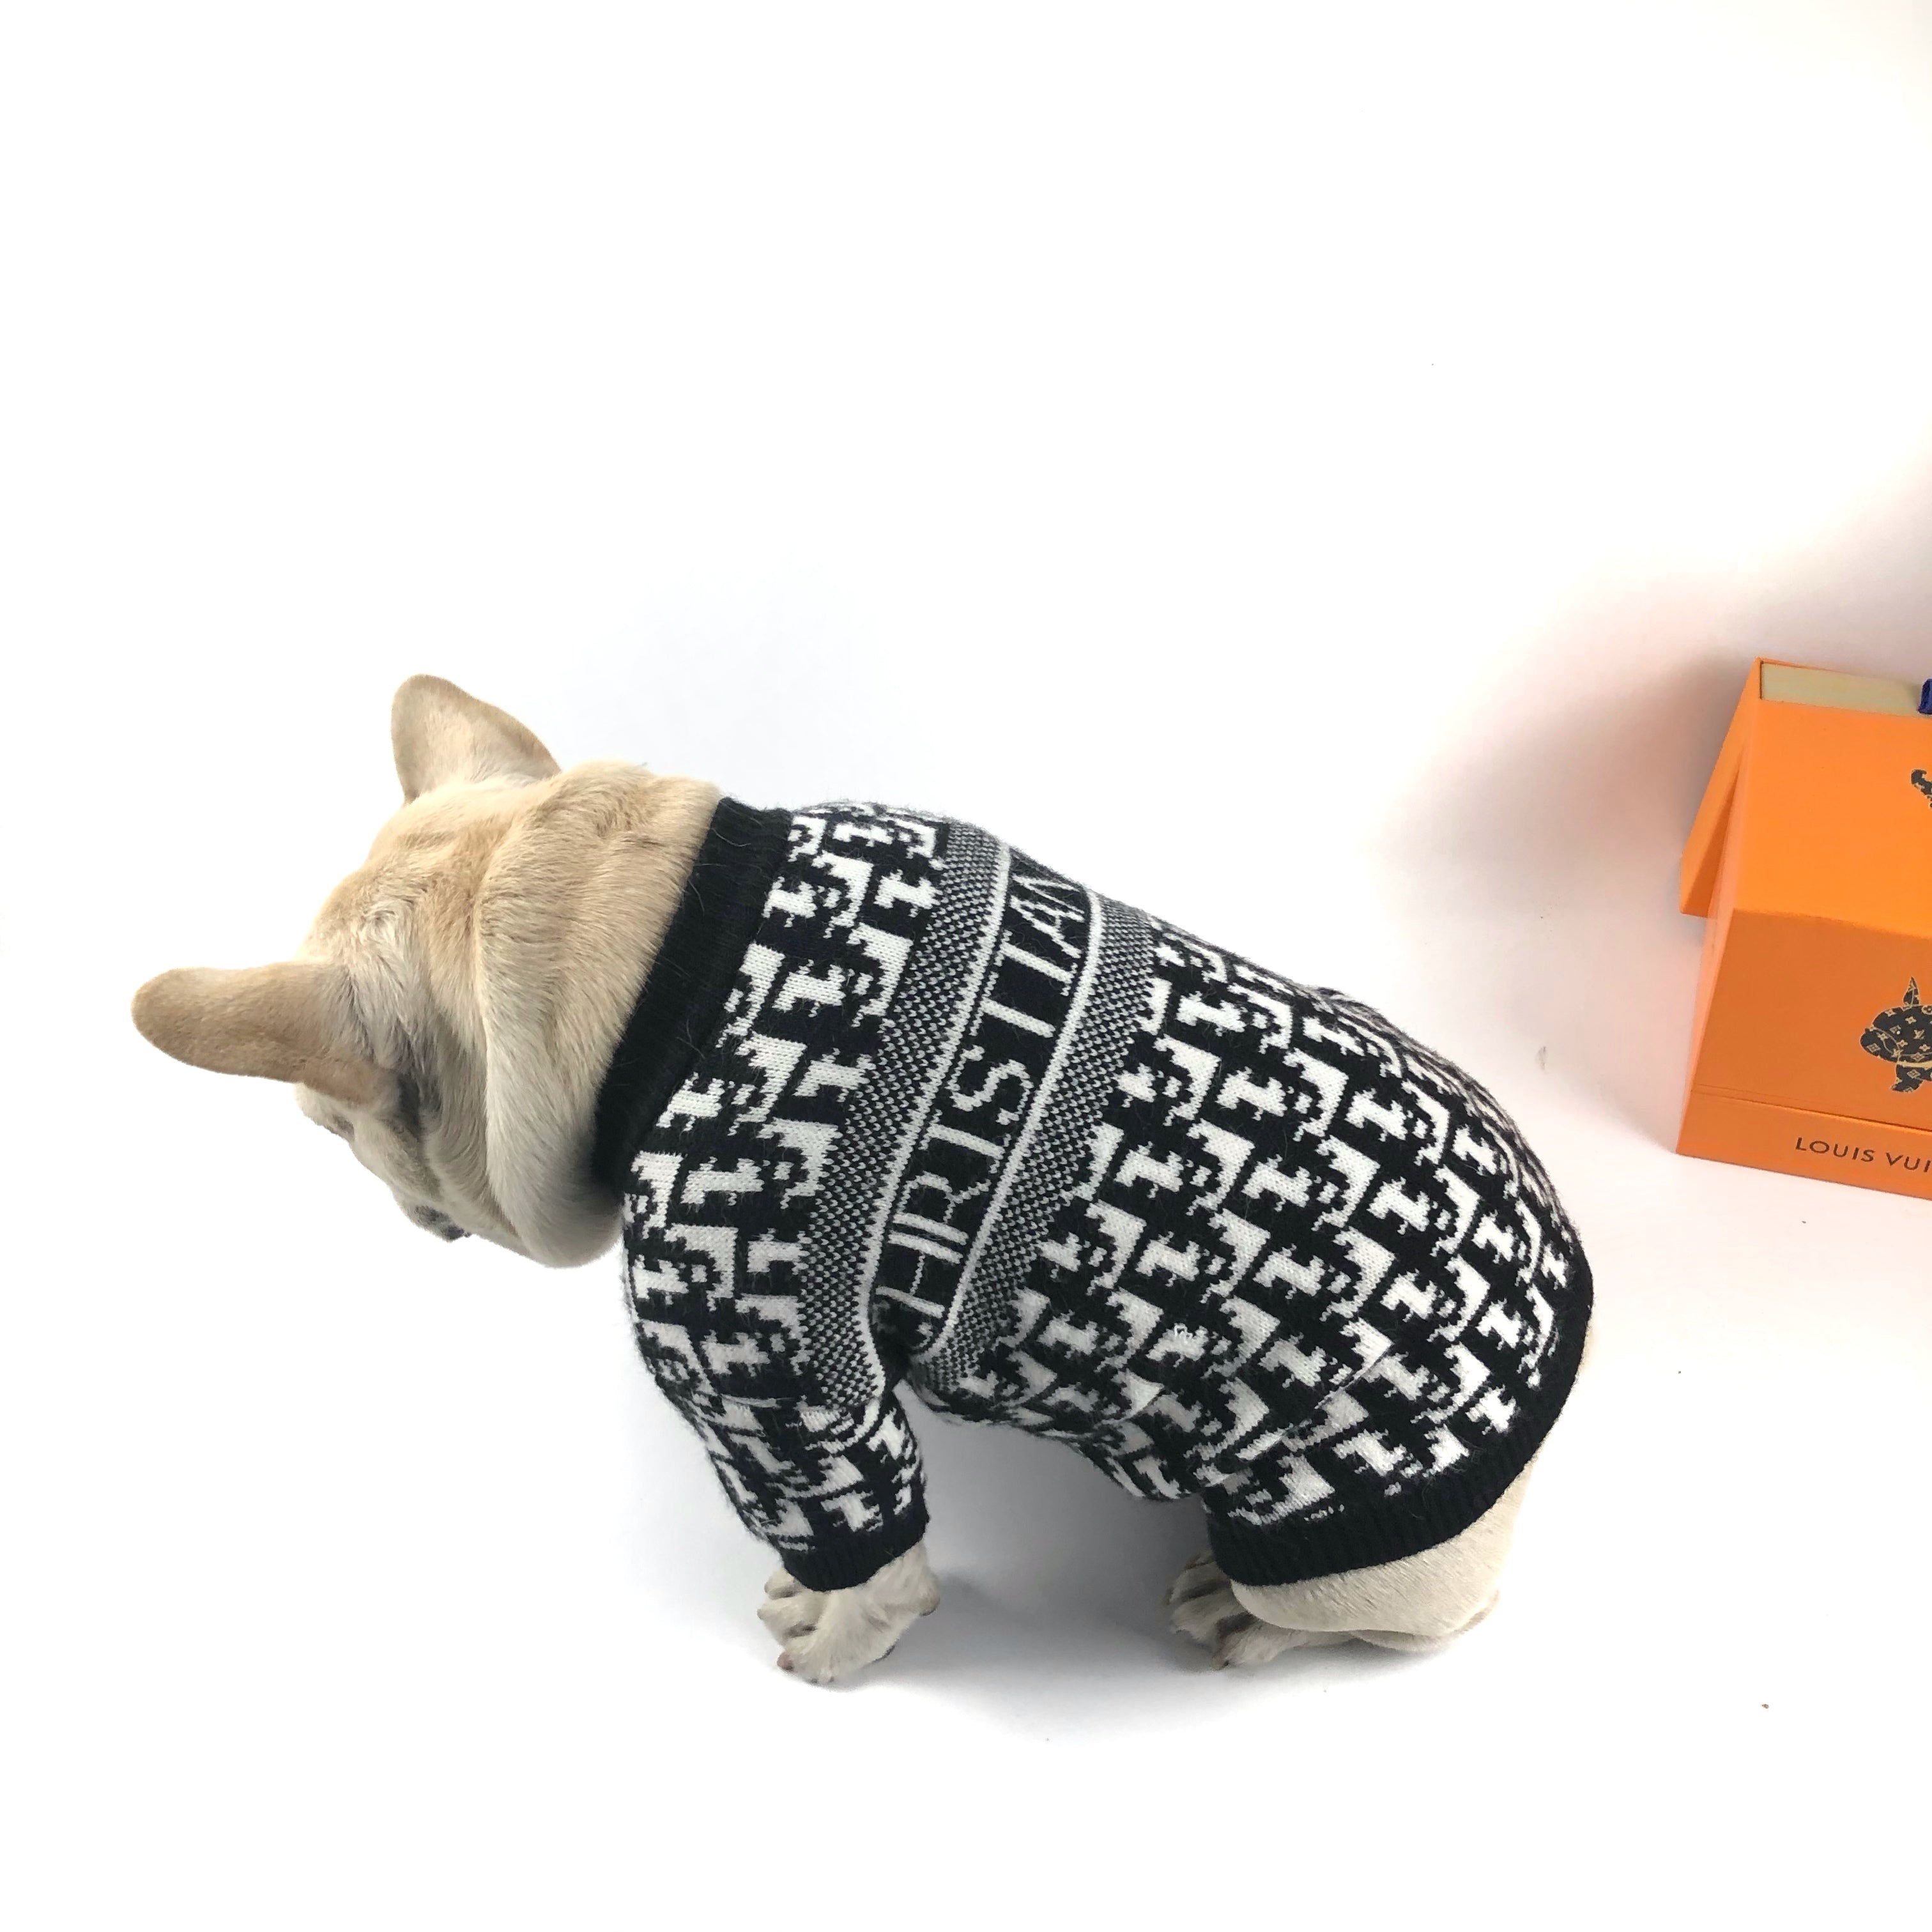 Chewing Dogior Book Sweater